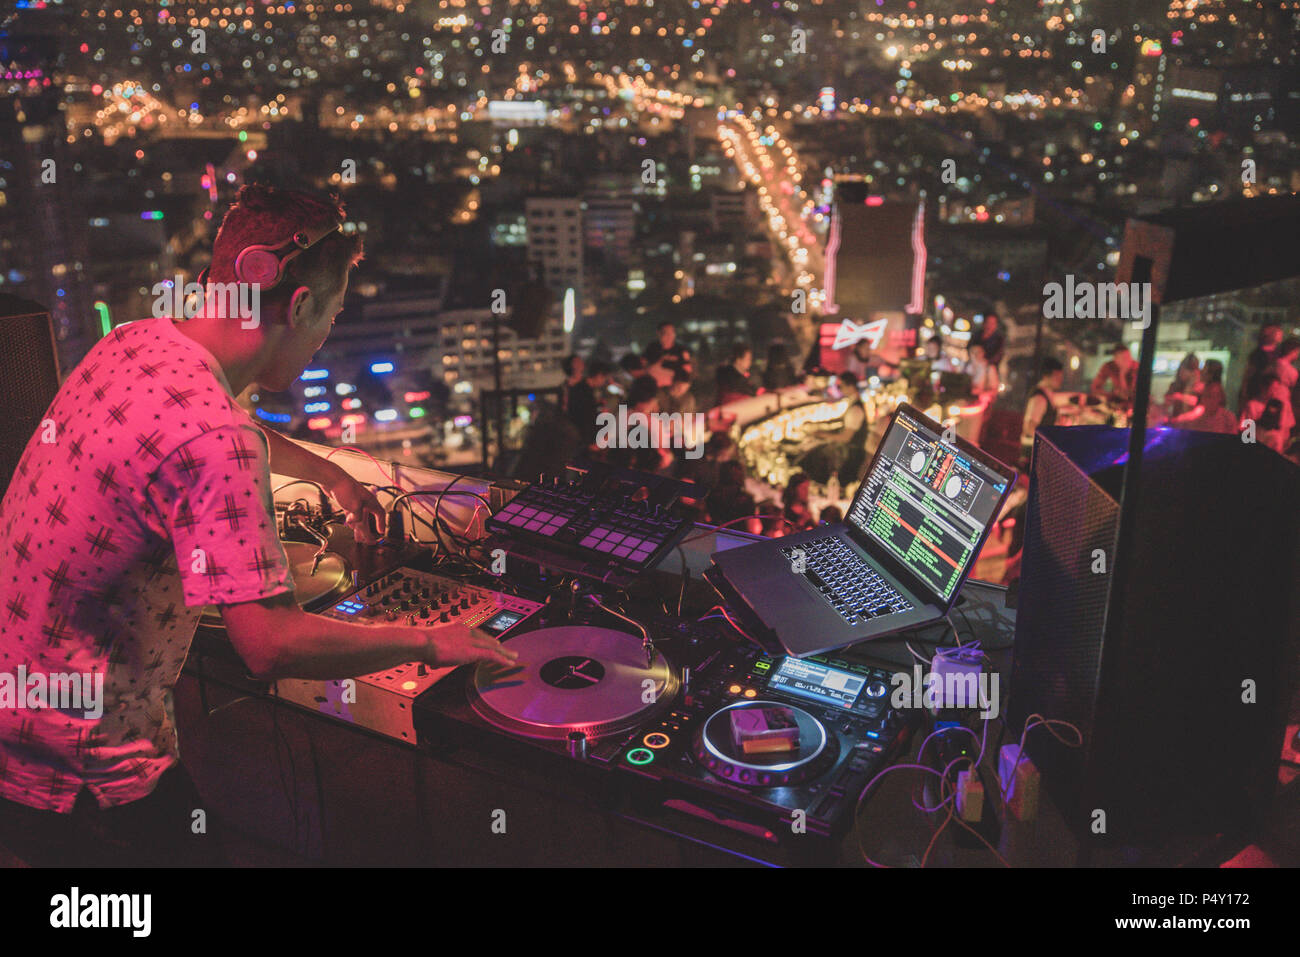 DJ - Party on top of building with music entertainment Stock Photo - Alamy